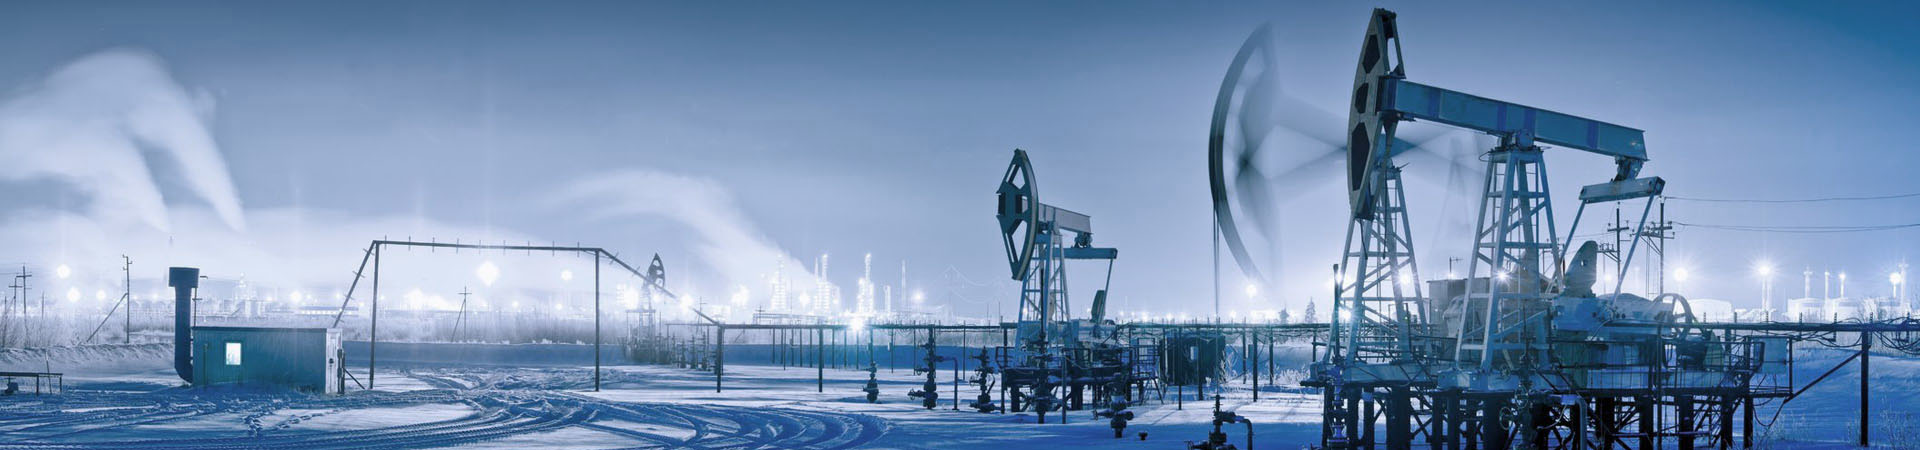 SharePoint Intranet Development for an Oil and Gas Service Company